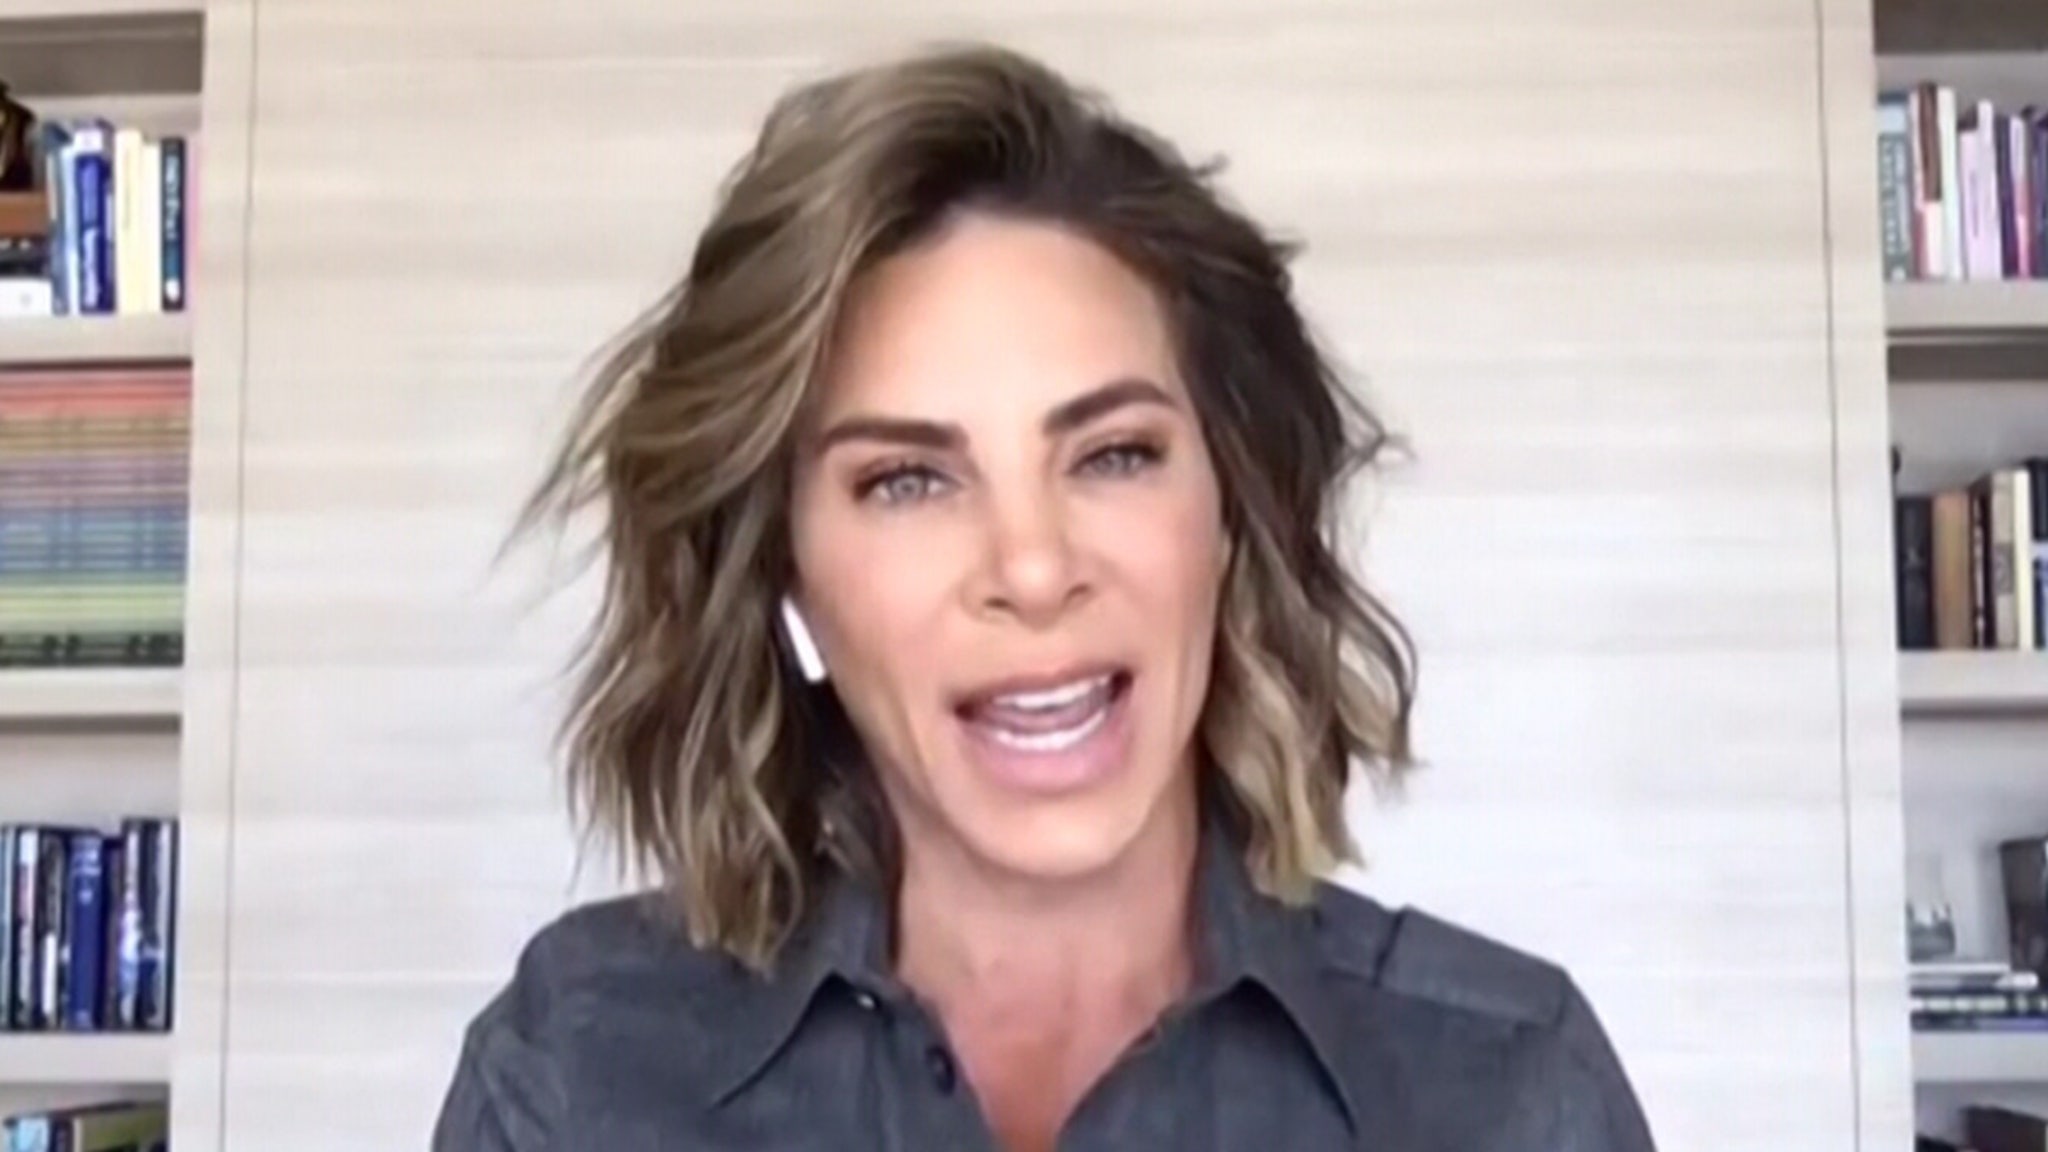 Jillian Michaels says gyms will recover after the pandemic